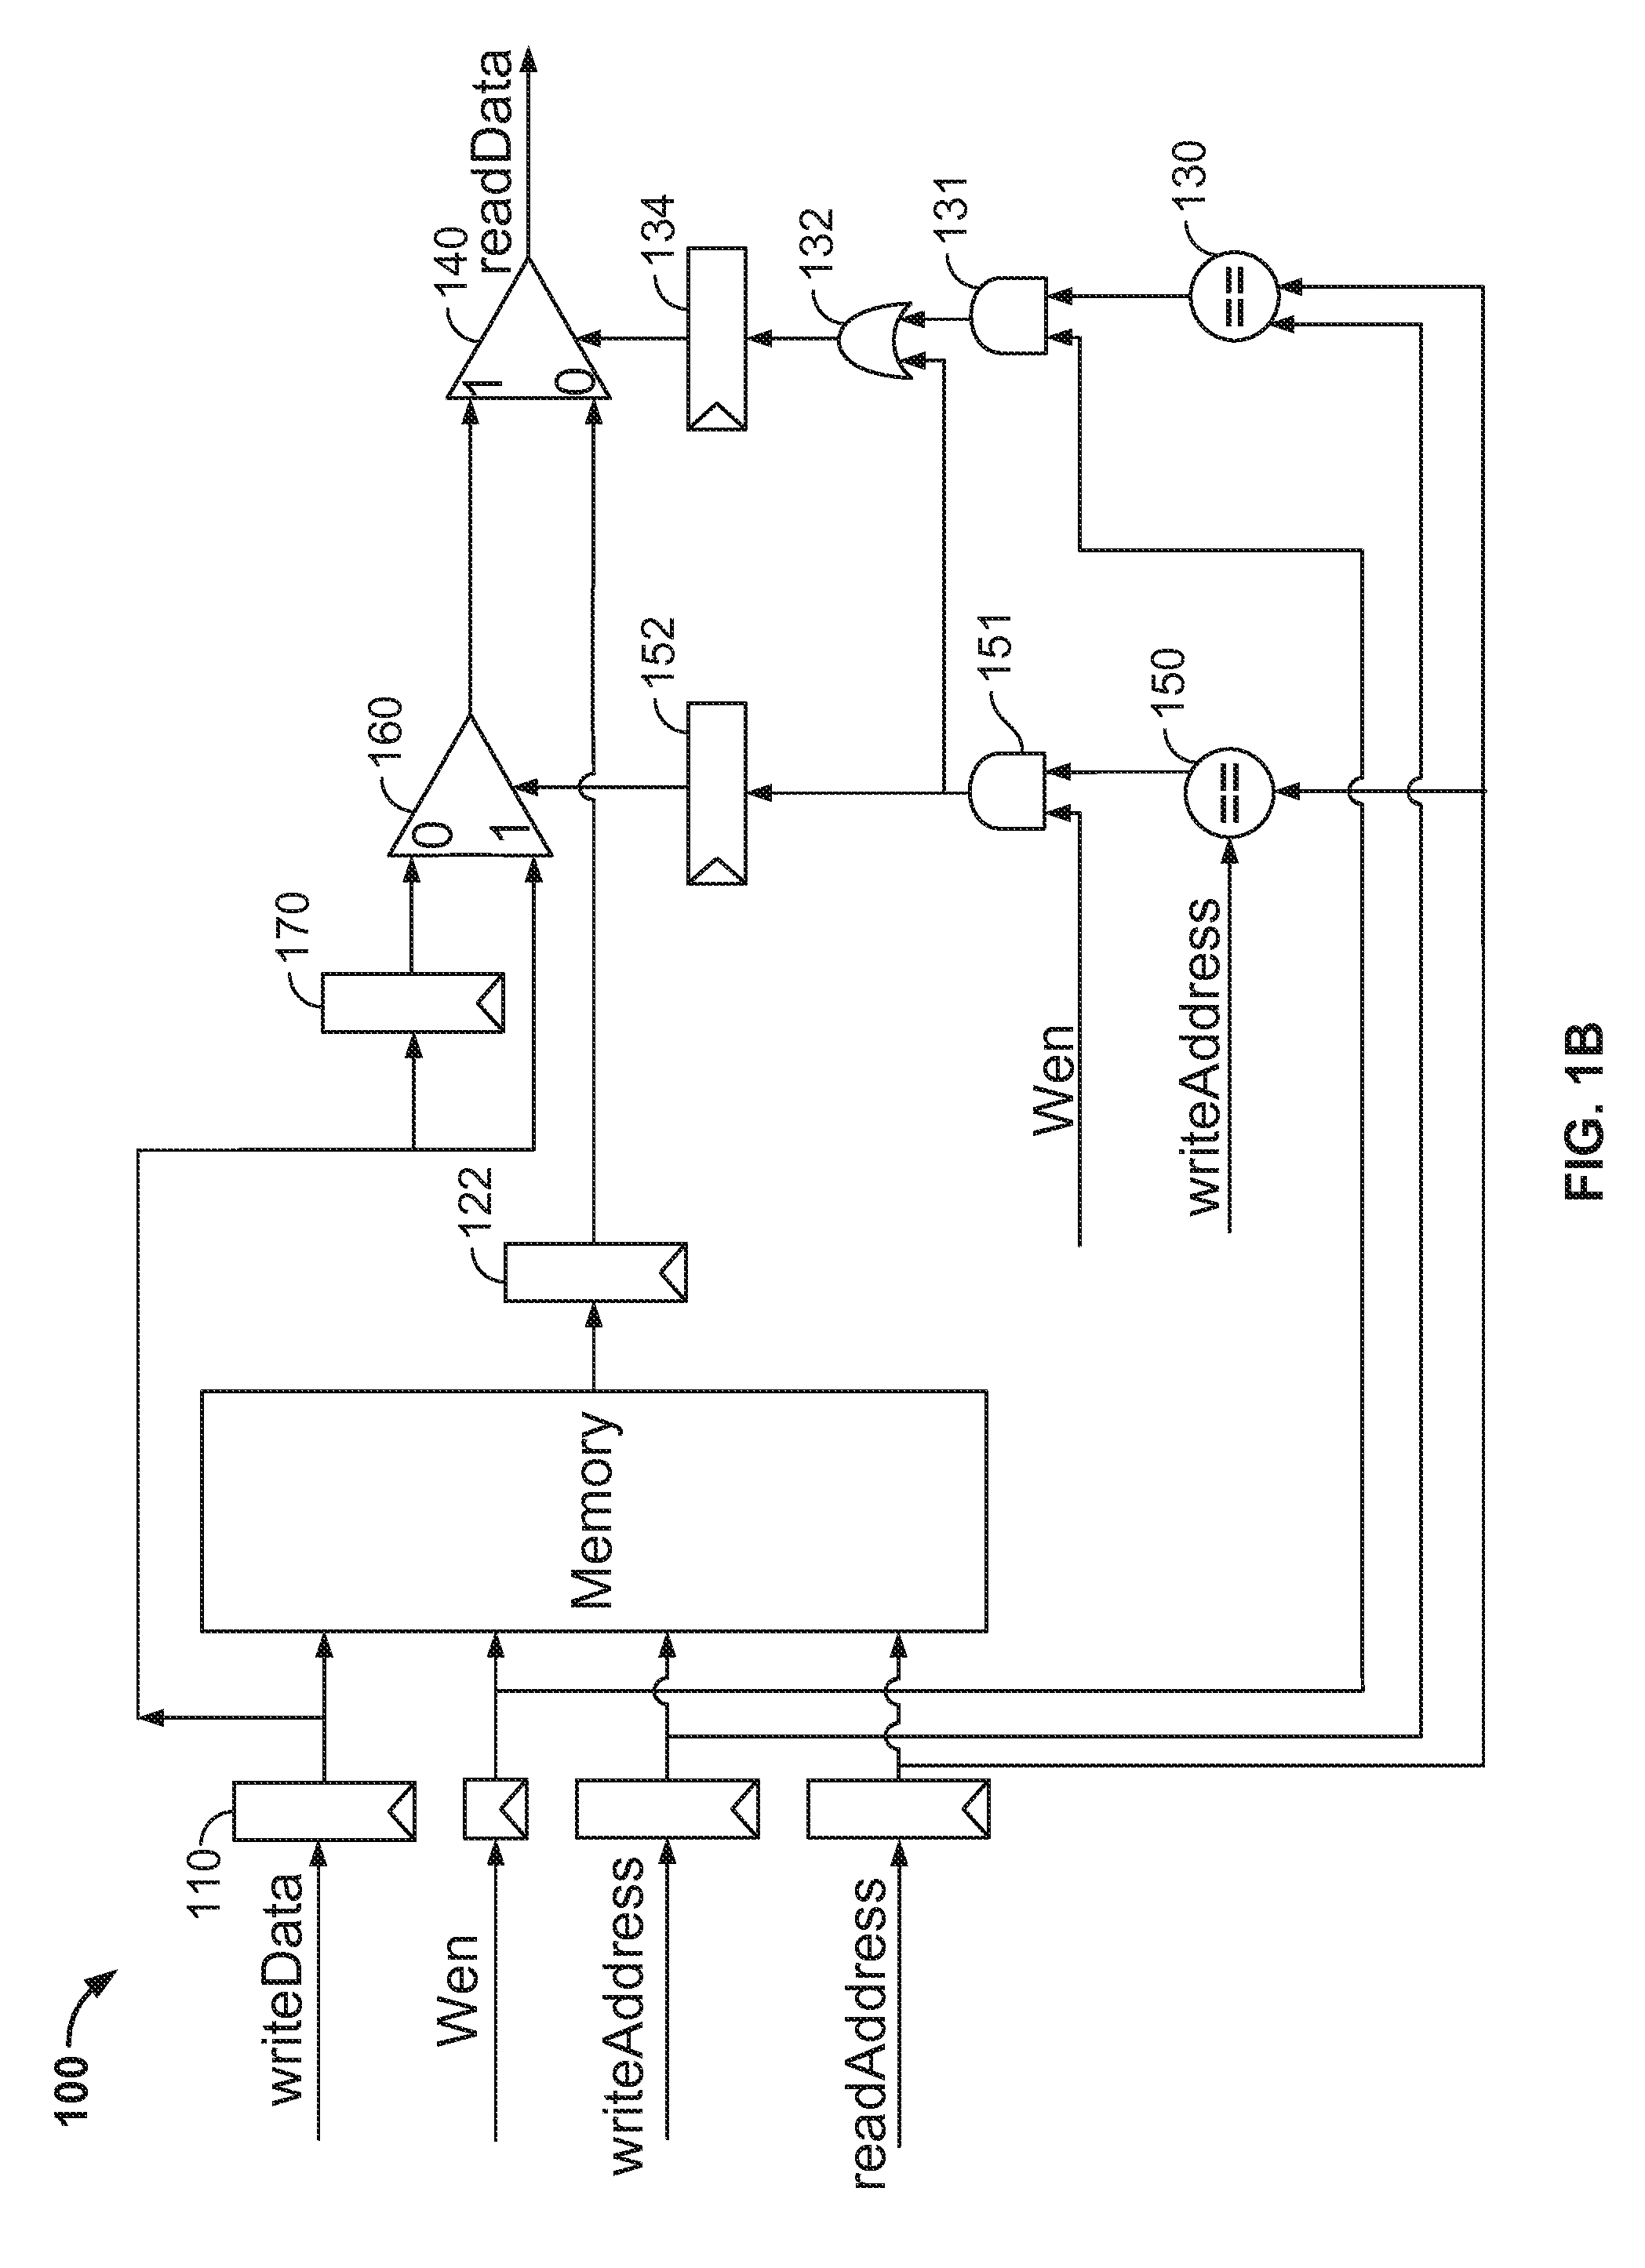 Systems and methods for maintaining memory access coherency in embedded memory blocks